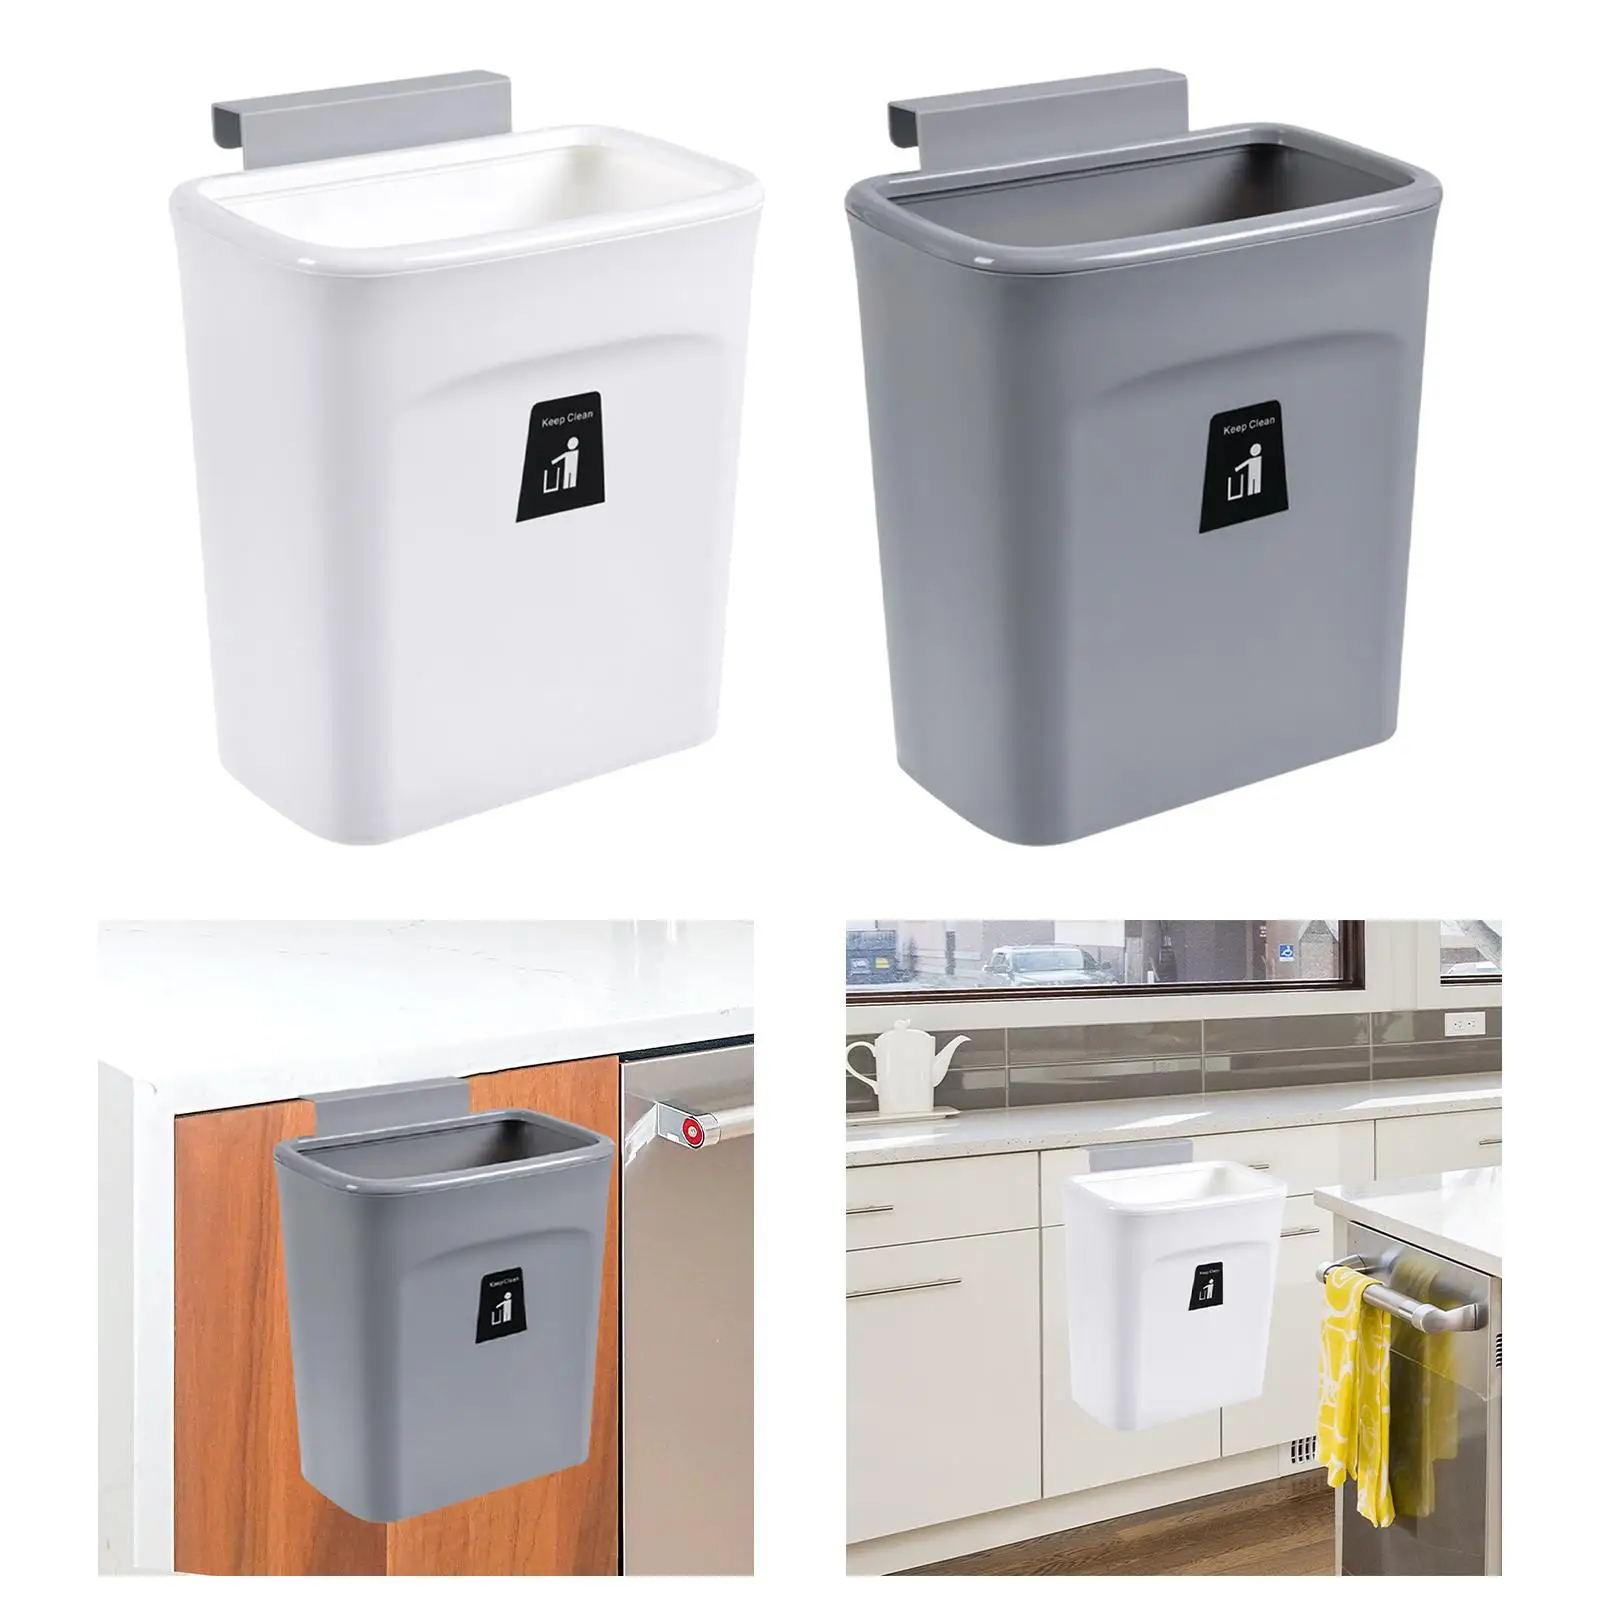 Wall Mounted Counter Waste Compost Bin with Sliding Cover Small under Sink Garbage Can Kitchen Cabinet Door Hanging Trash Can